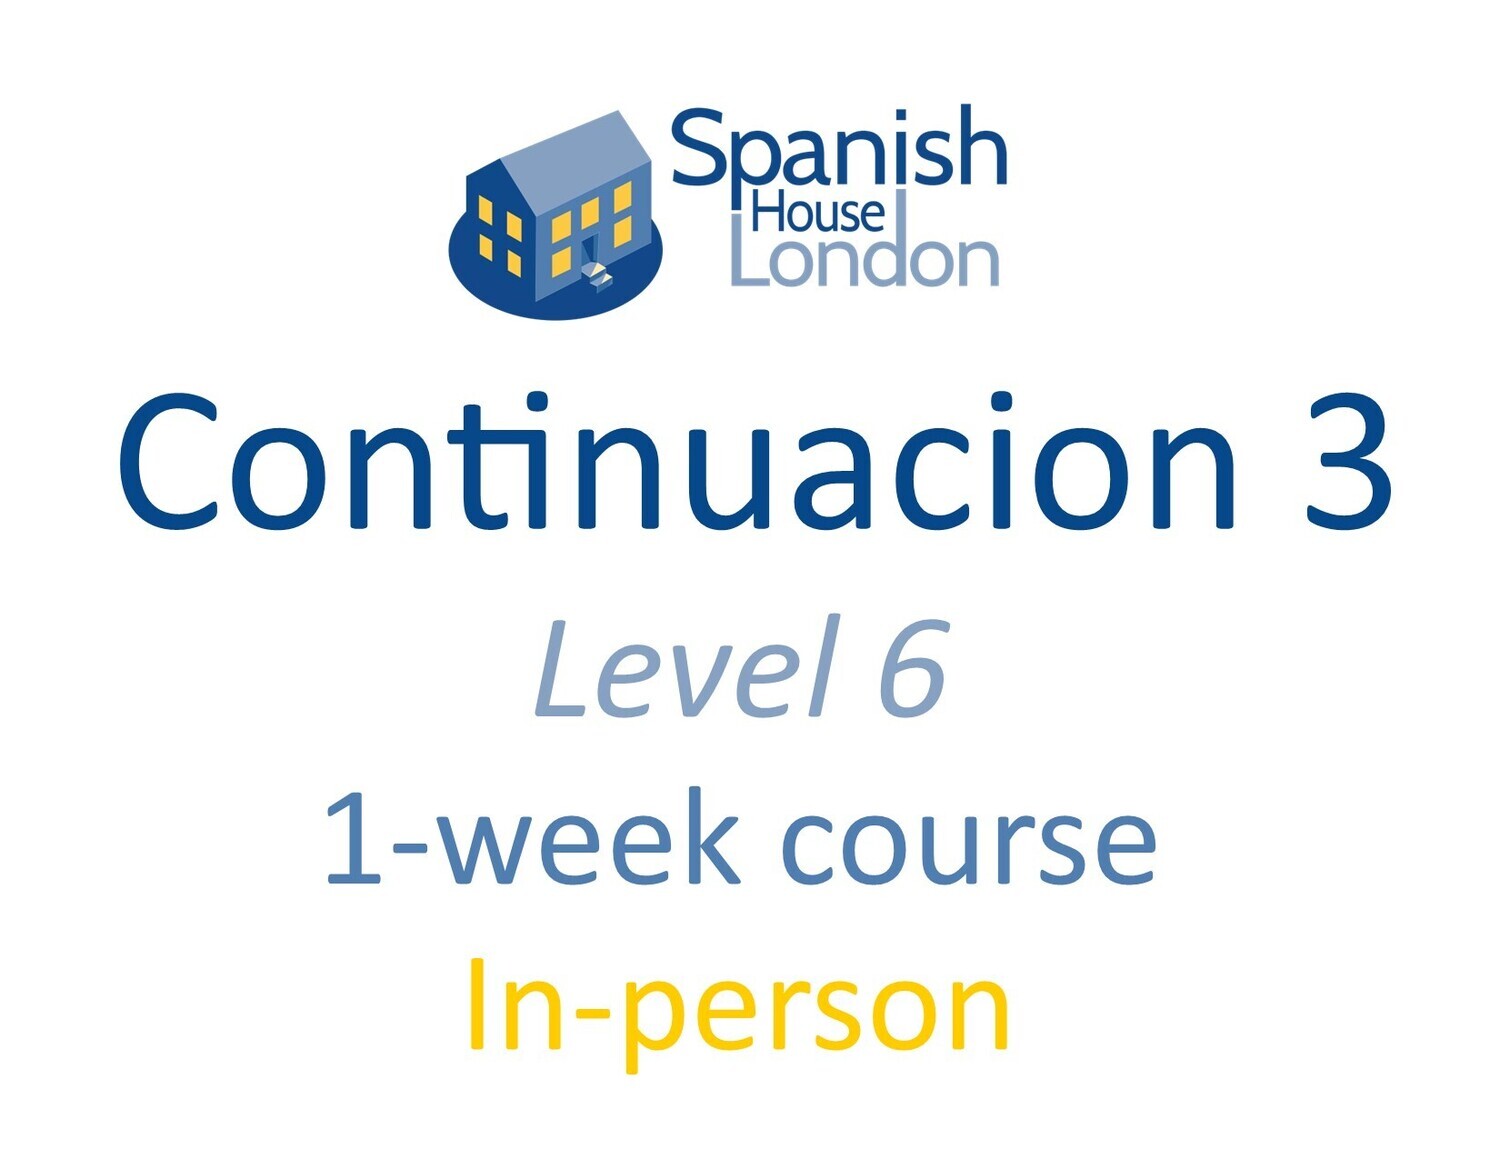 One-Week Intensive Continuacion 3 Course starting on 20th November at 10.30am in Clapham North